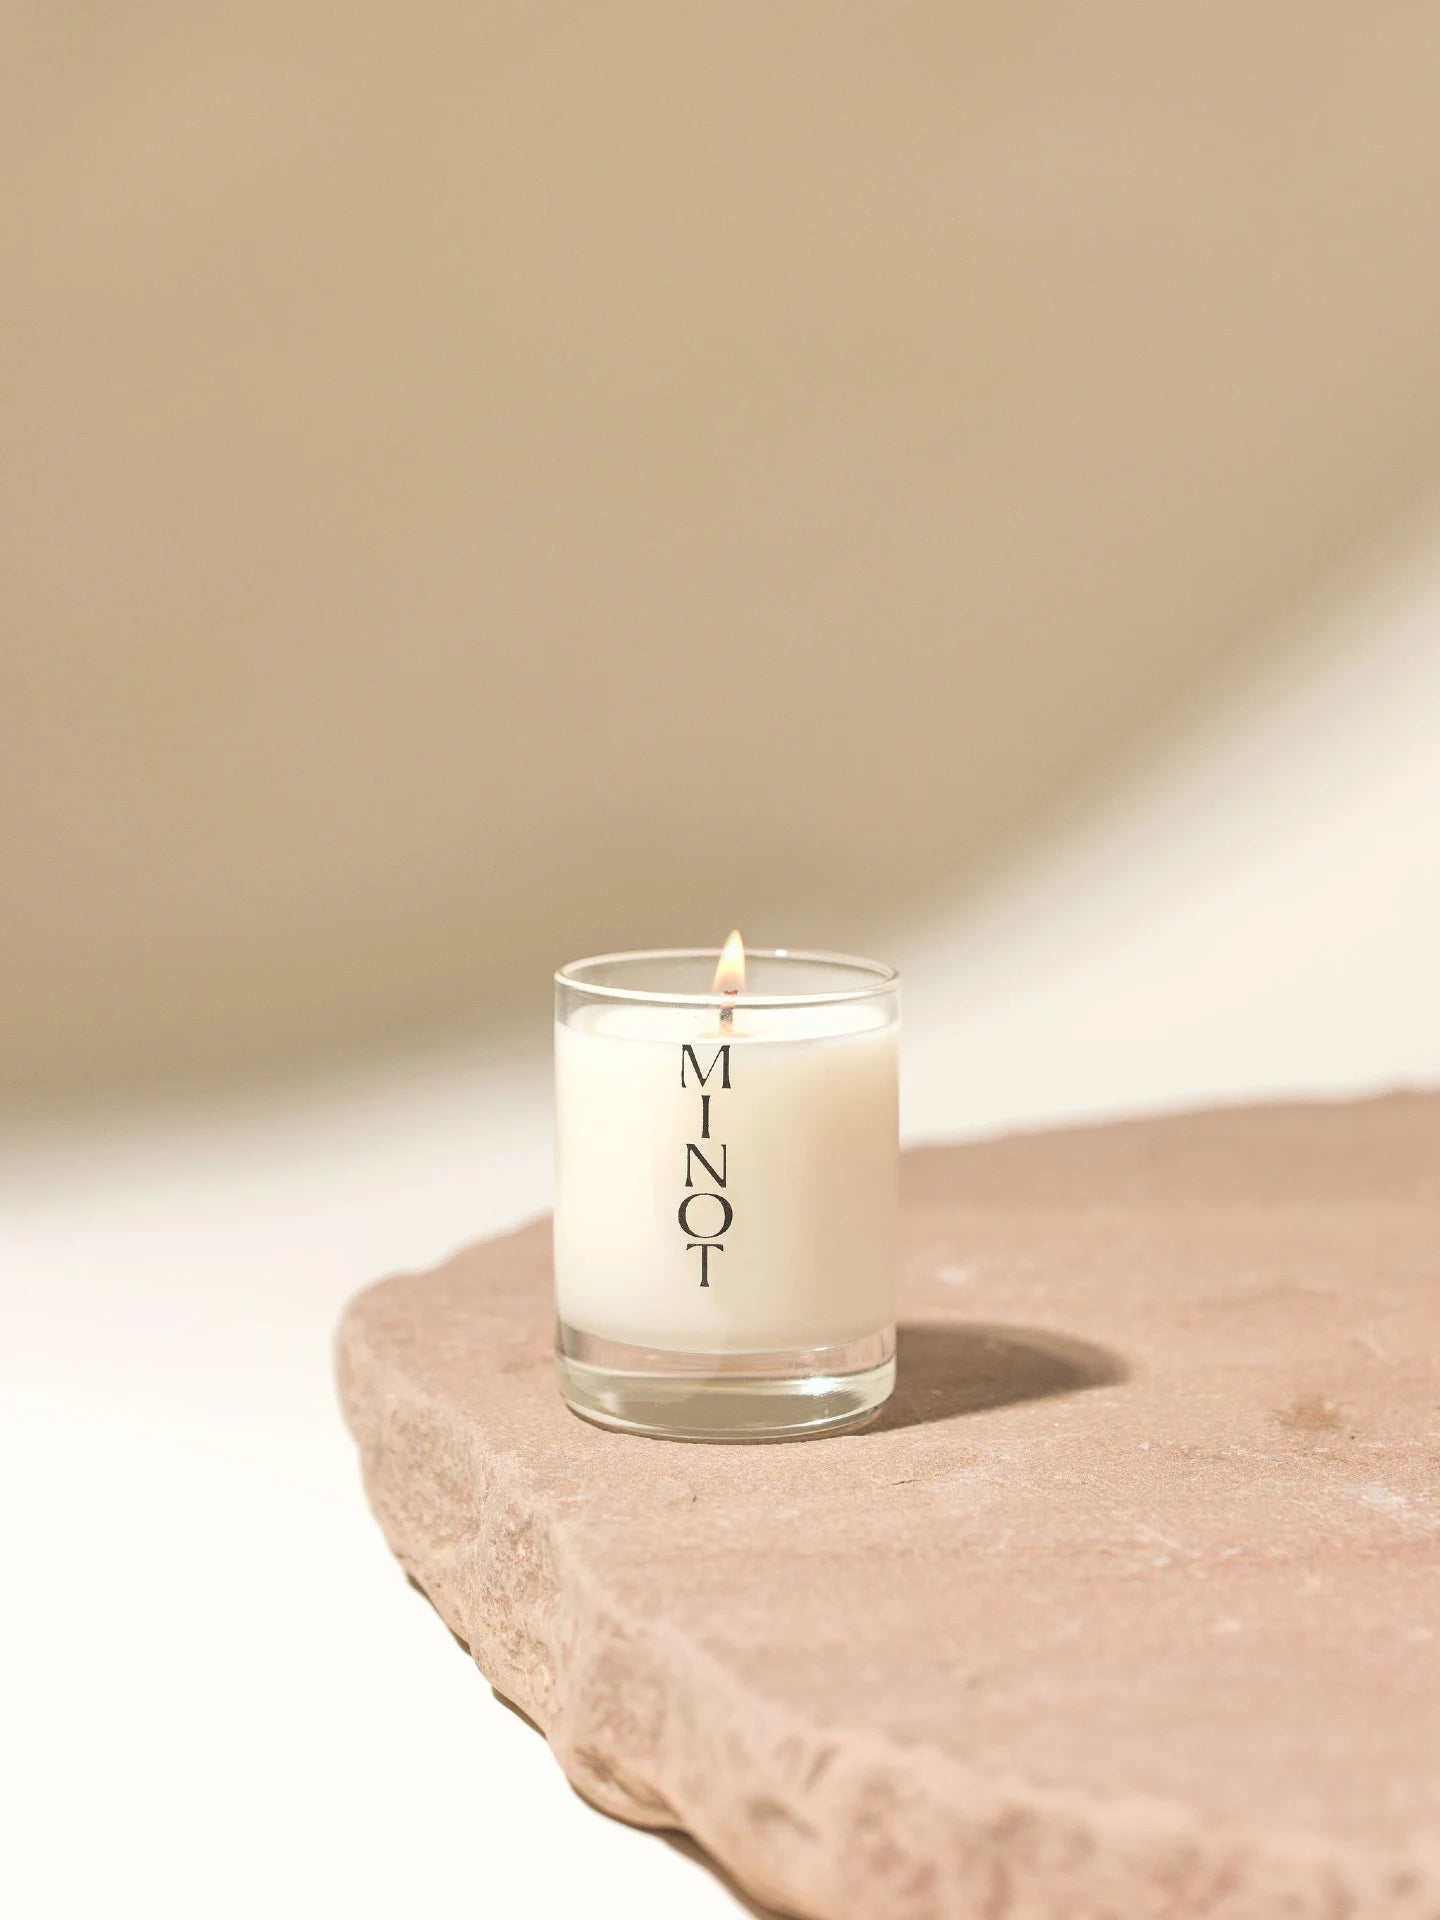 Summit Mini is an earthy, clean-burning soy wax candle that smells like evergreens atop a mountain